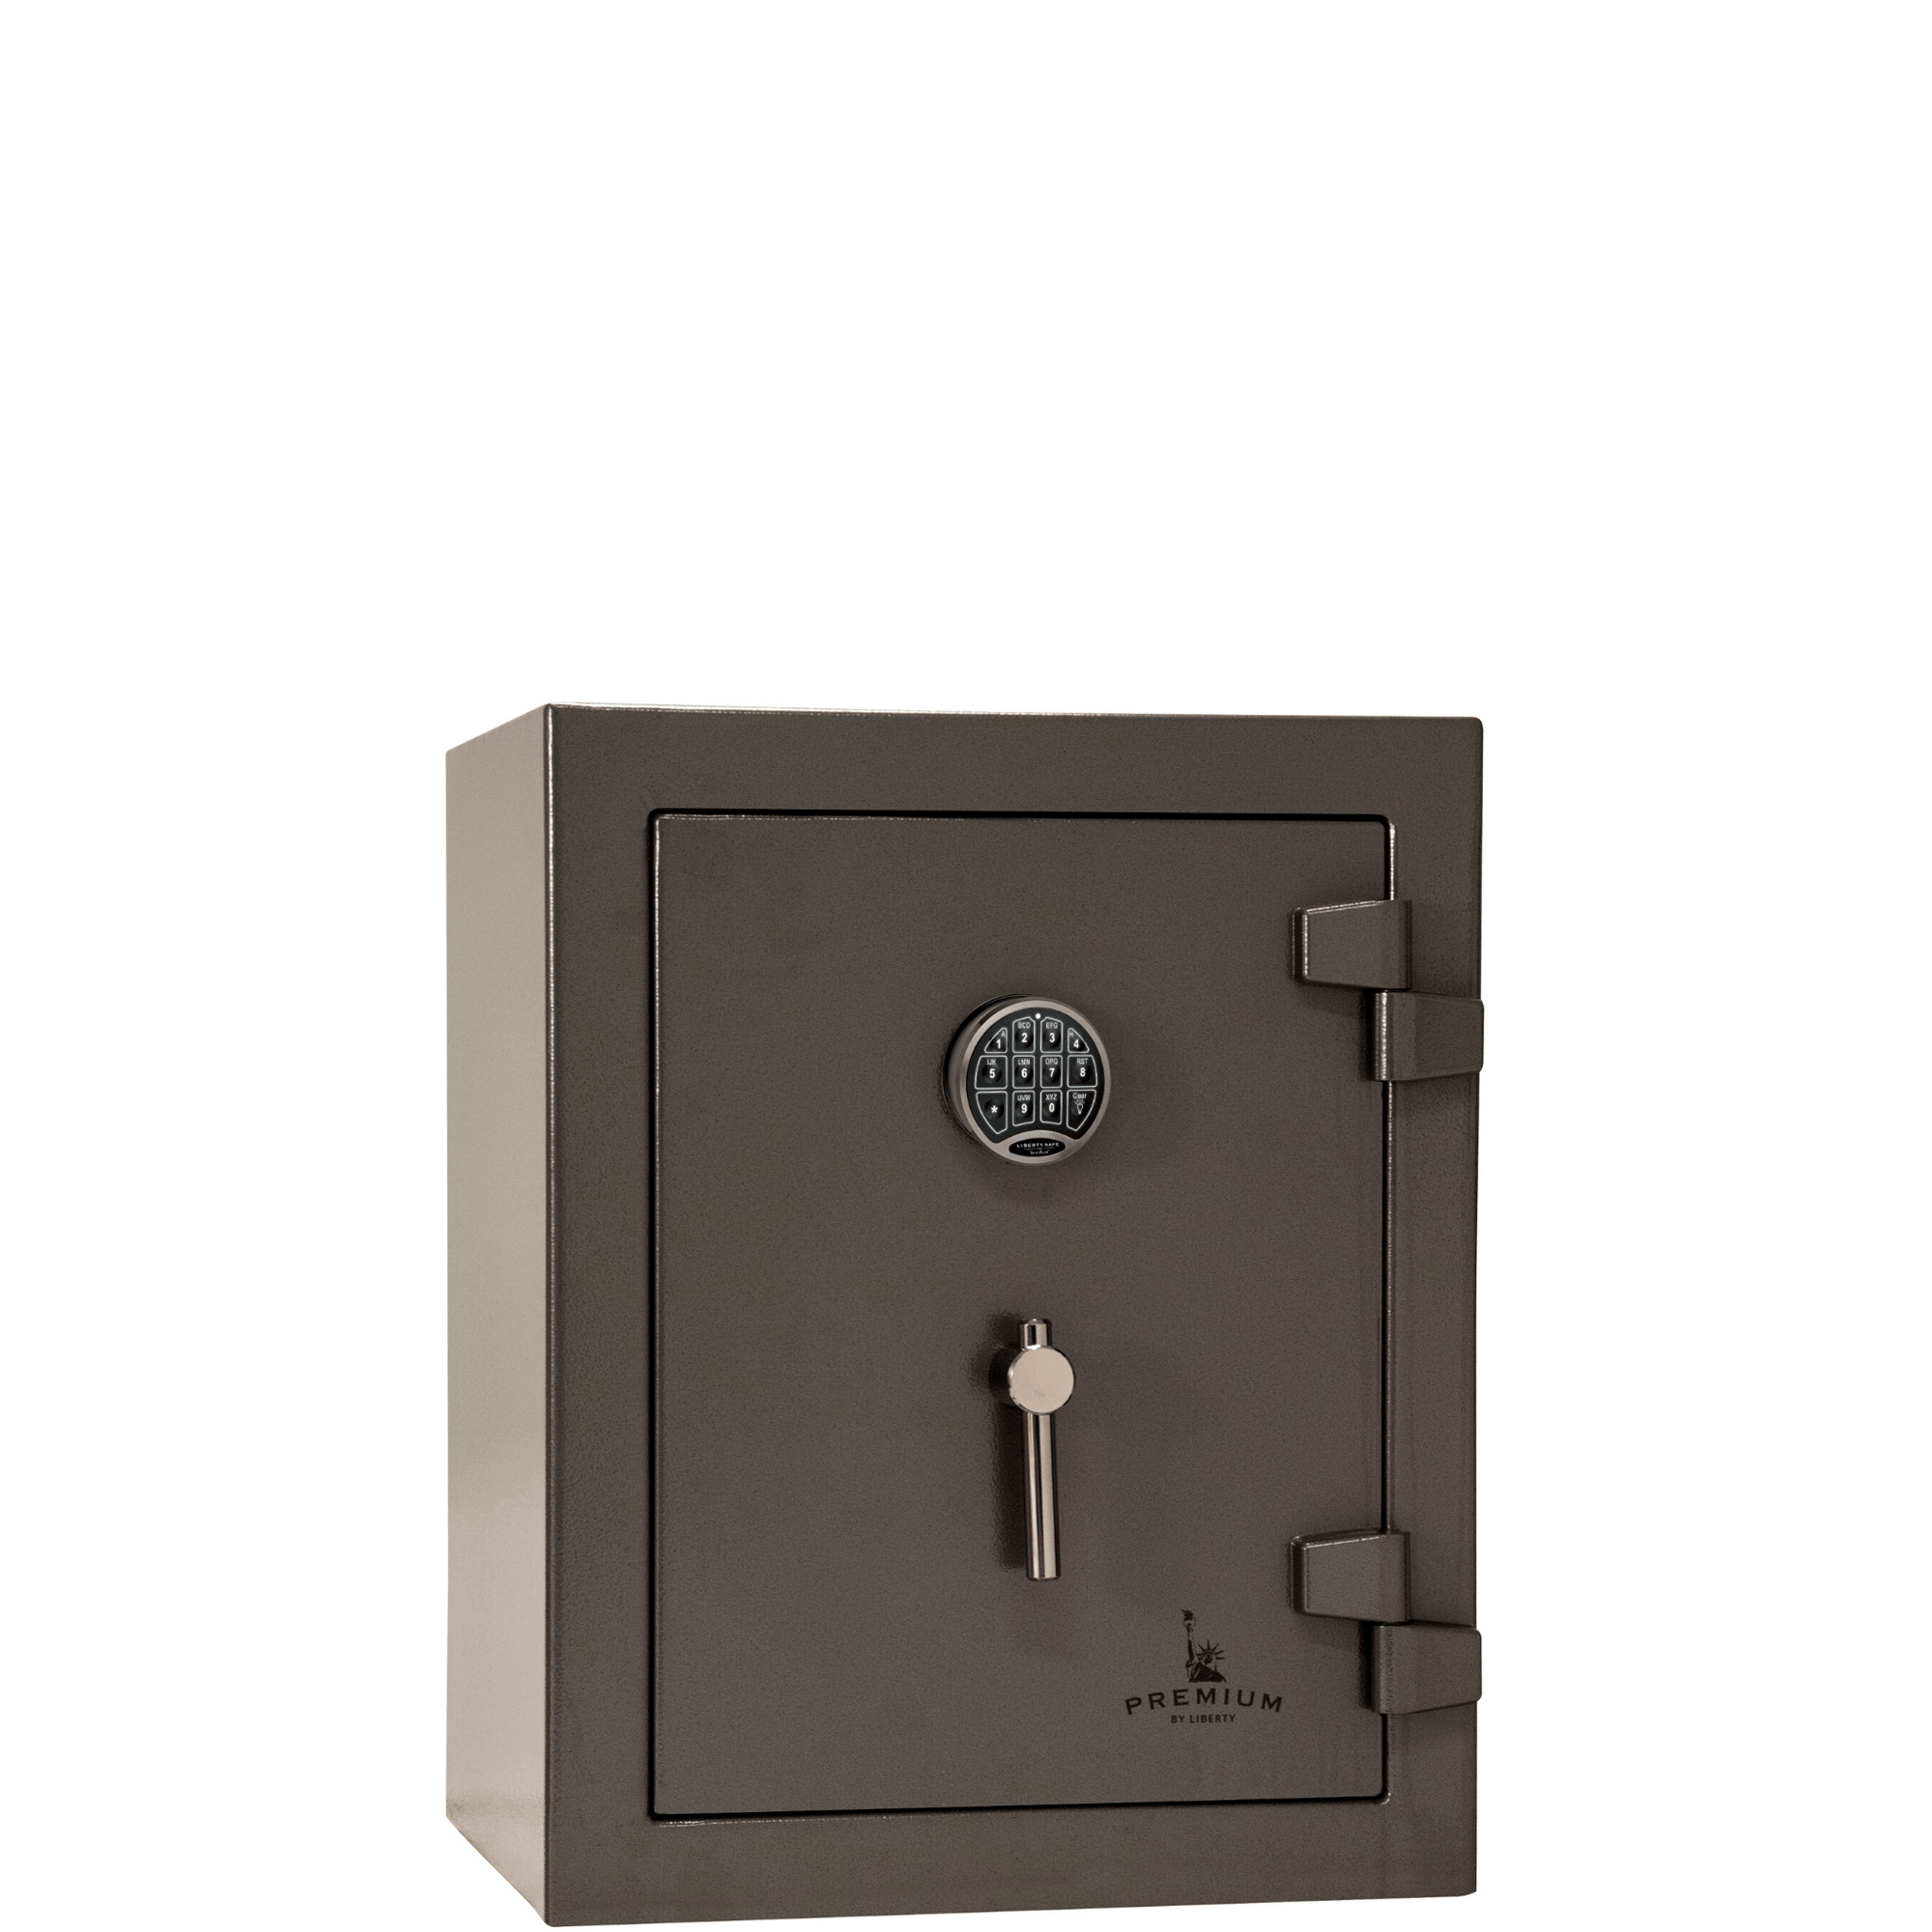 Premium Home | 08 | 90 Minute Fire Protection | Gray | Electronic Lock | Dimensions: 30"(H) x 24"(W) x 22.5"(D) | Liberty Safe Norcal.